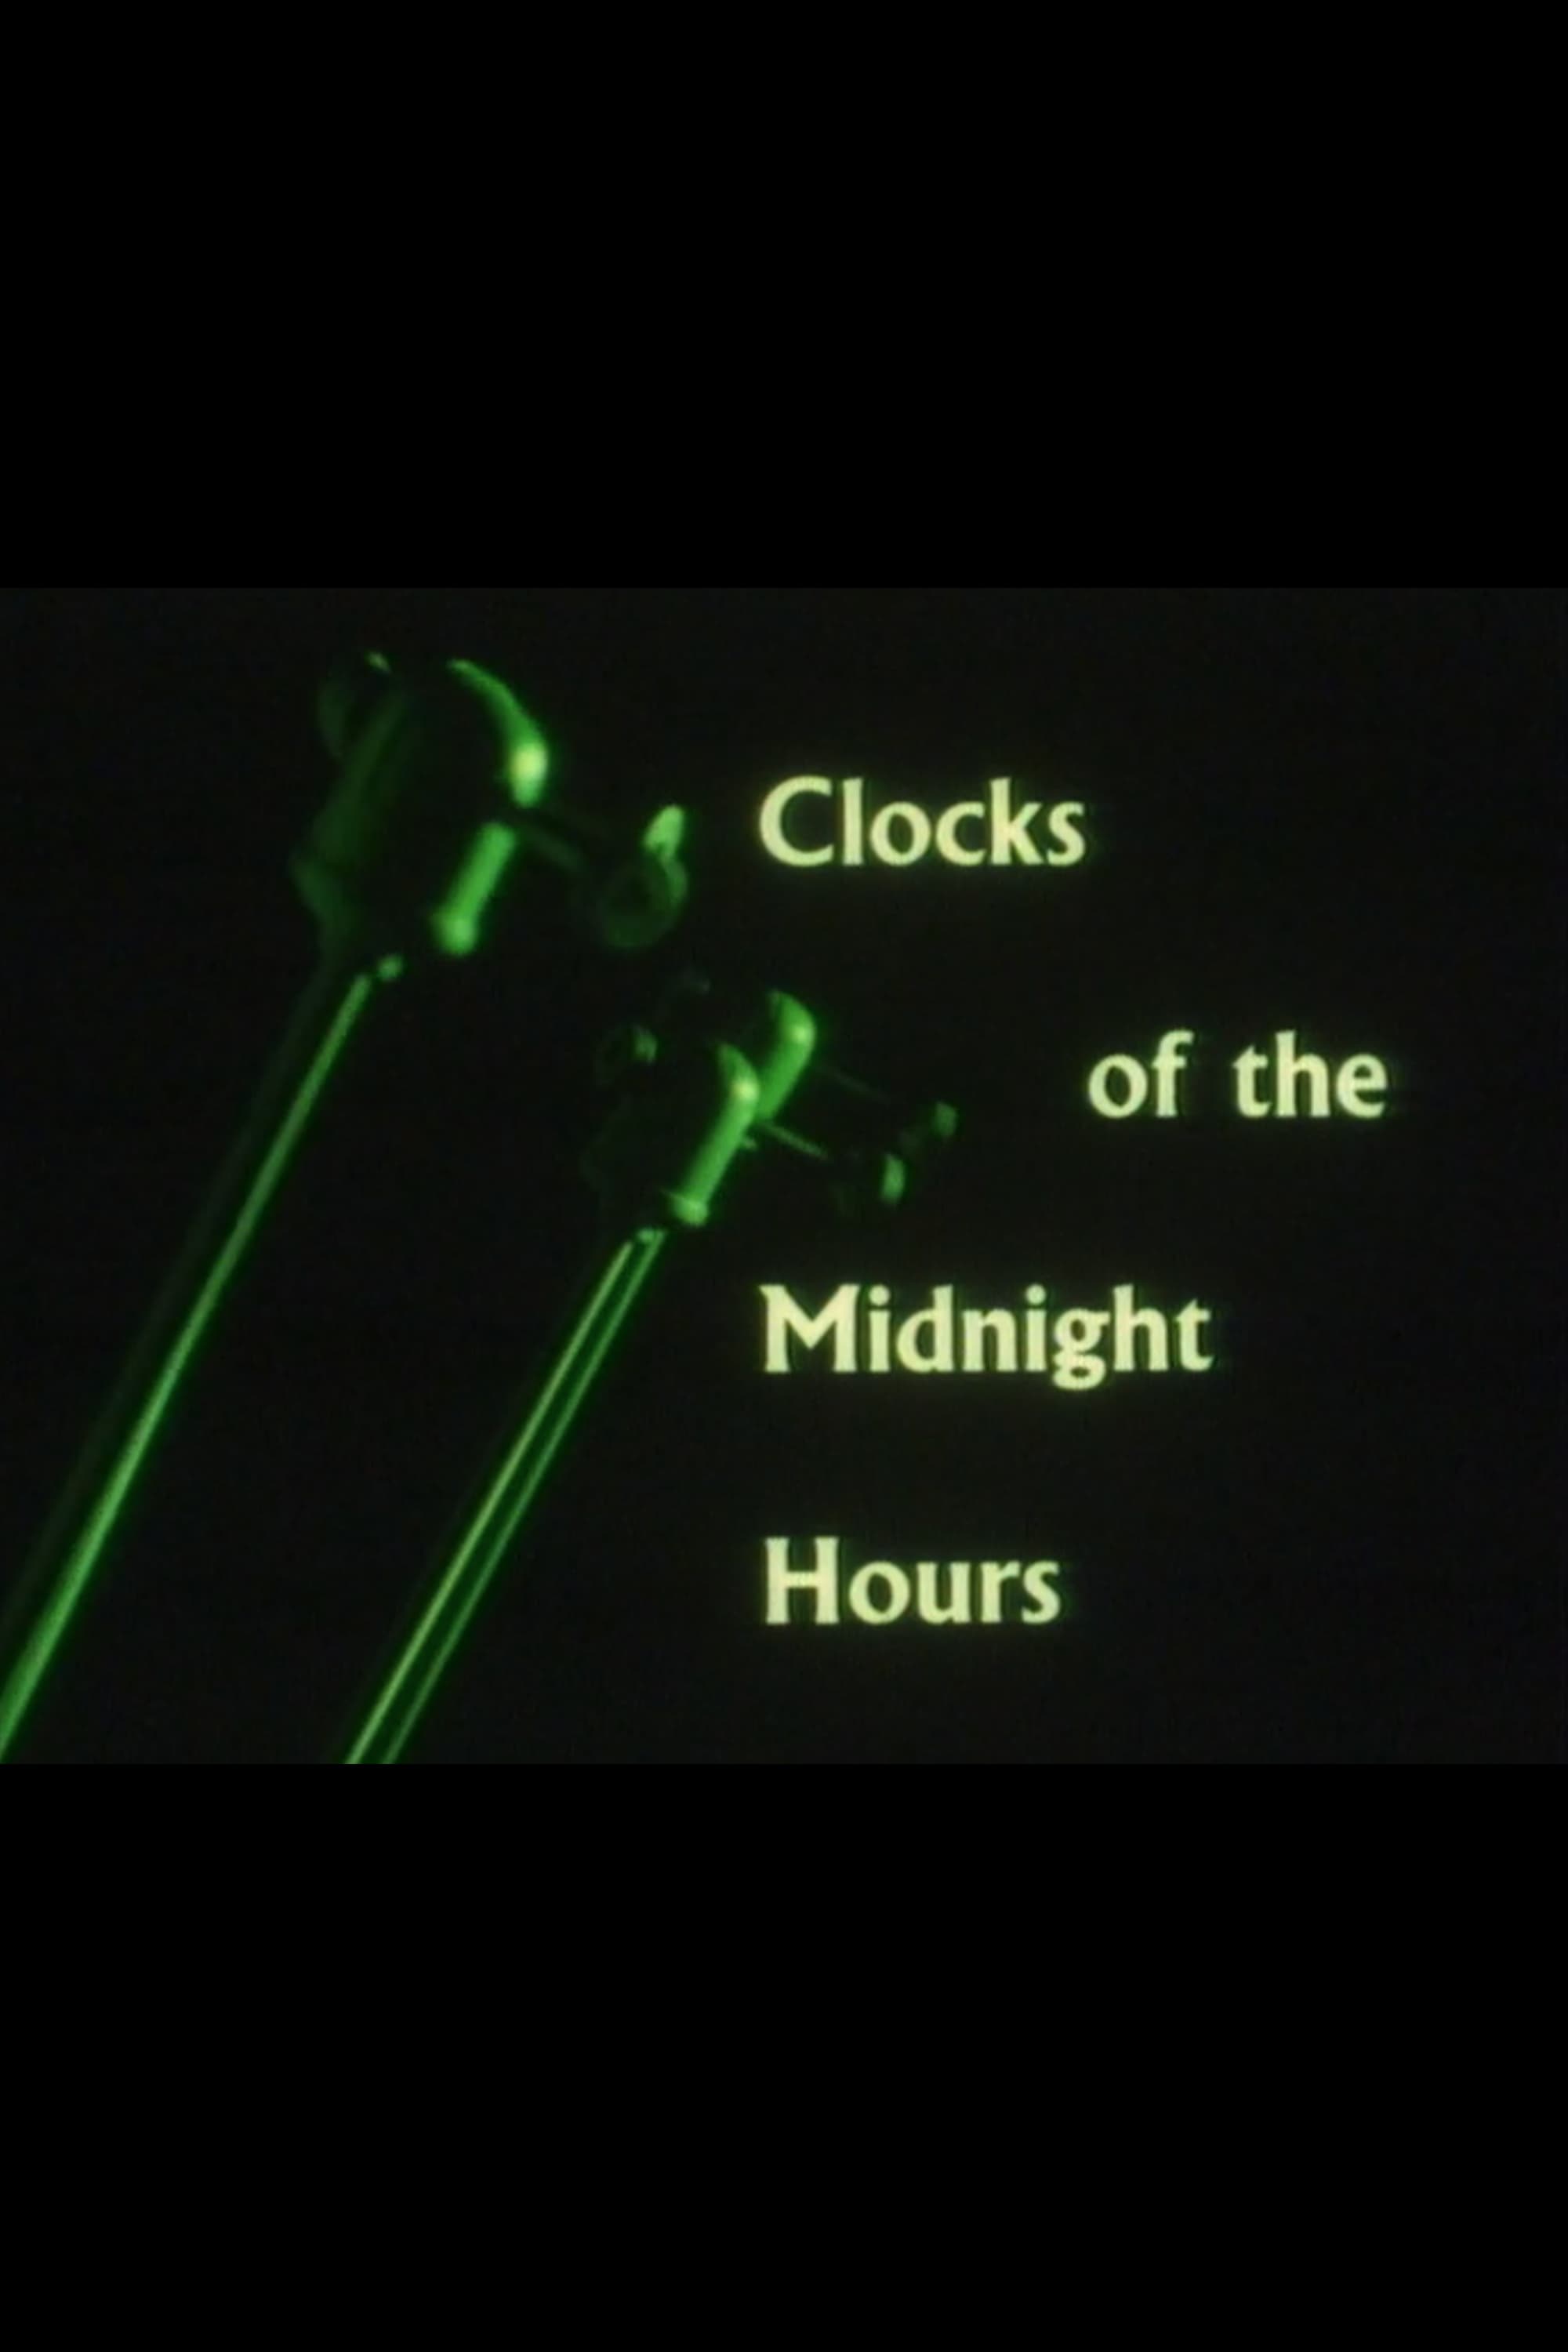 Clocks of the Midnight Hours